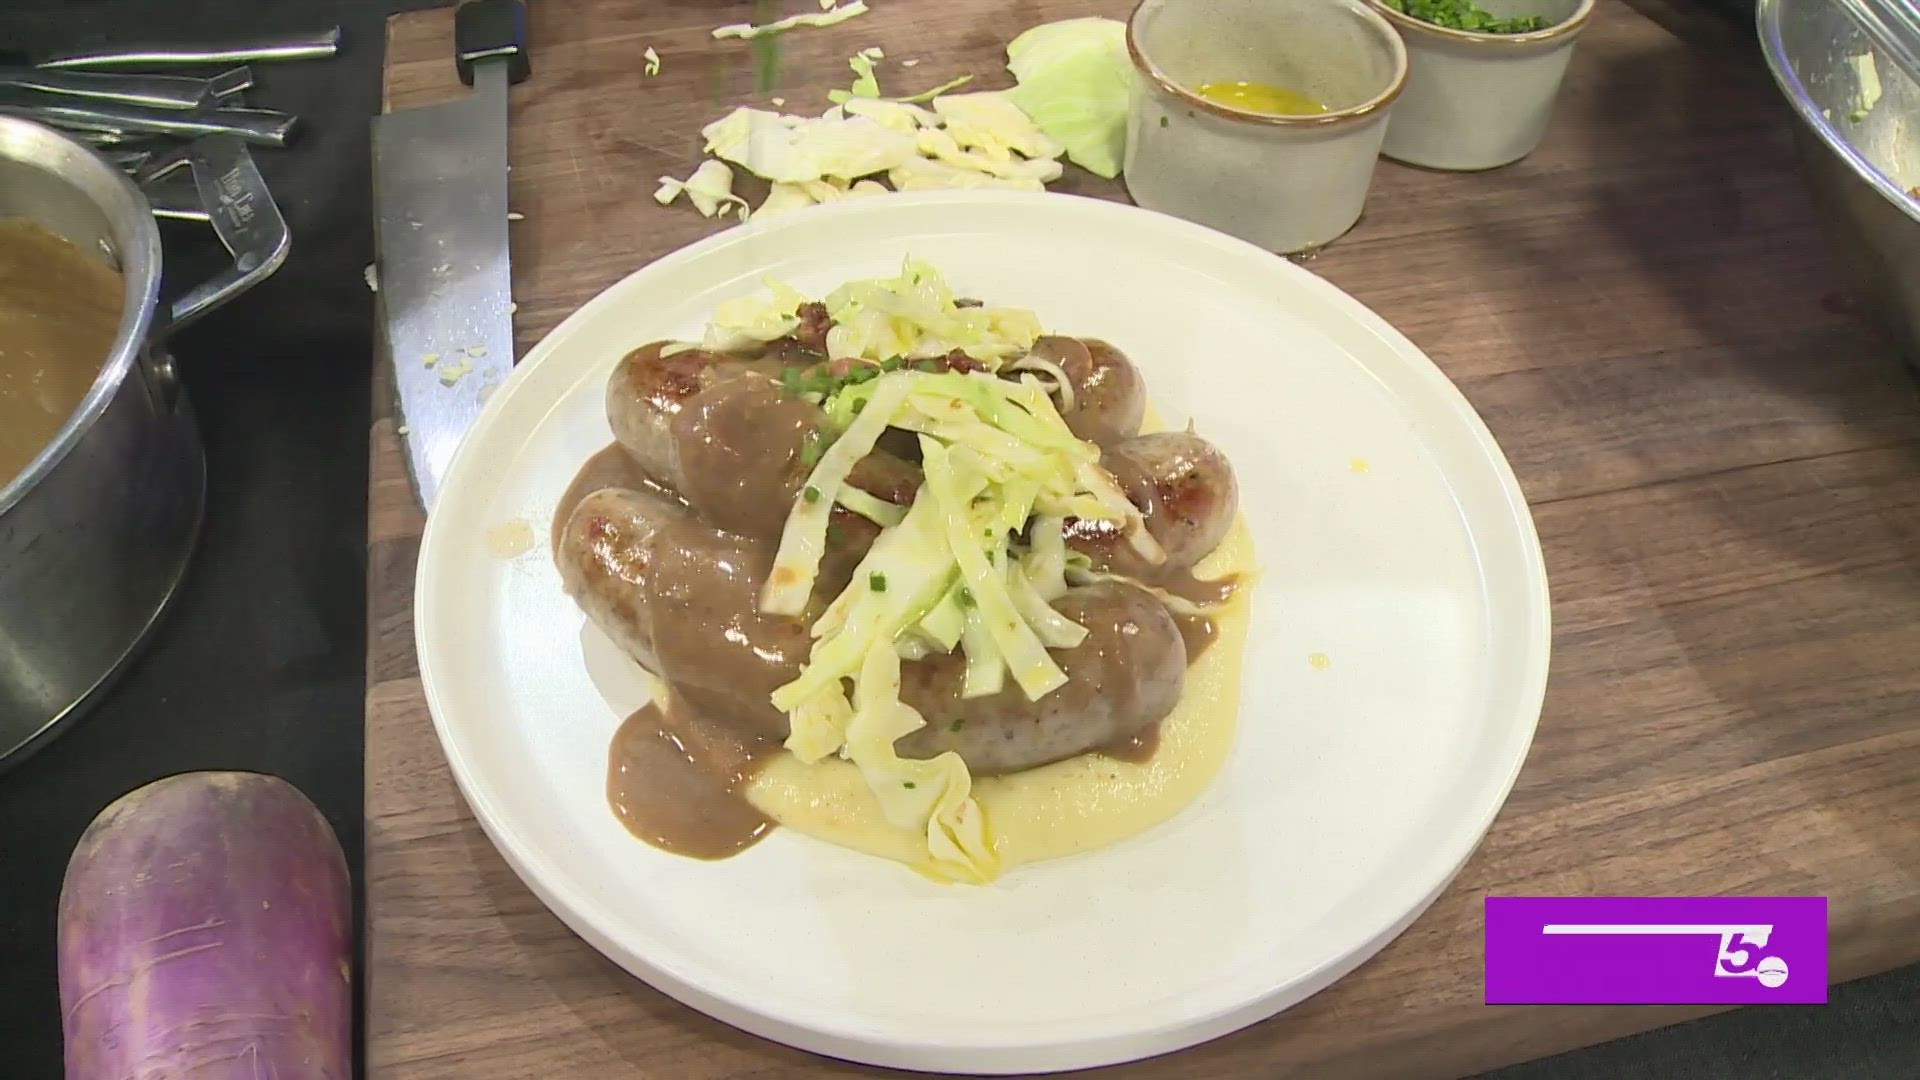 Chef Joseph Martinez with Tributary cooks up a delicious Irish dish in time for St. Patrick's Day.